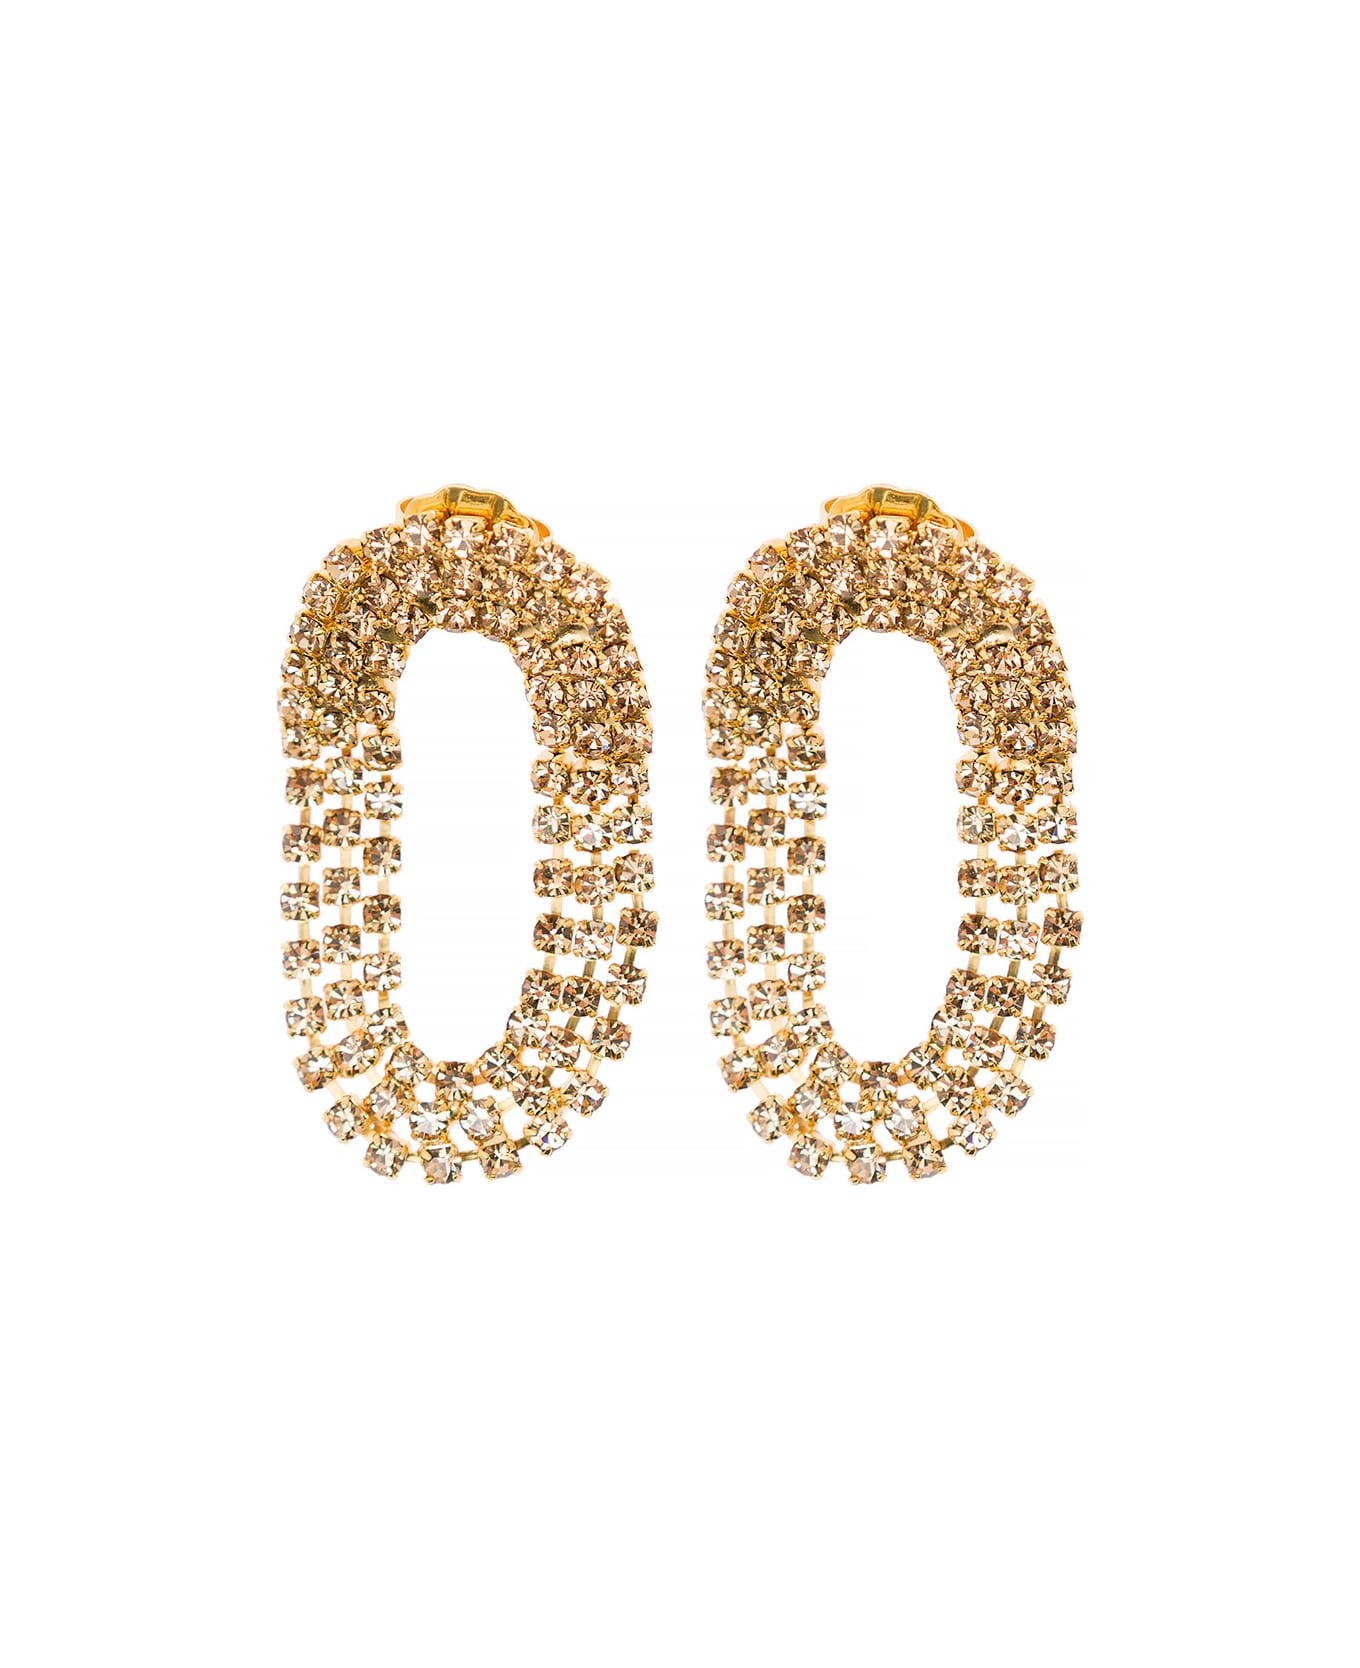 Silvia Gnecchi 'liberty Mini' Earrings With Crystals In Galvanized Brass 24k Gold Woman - Metallic